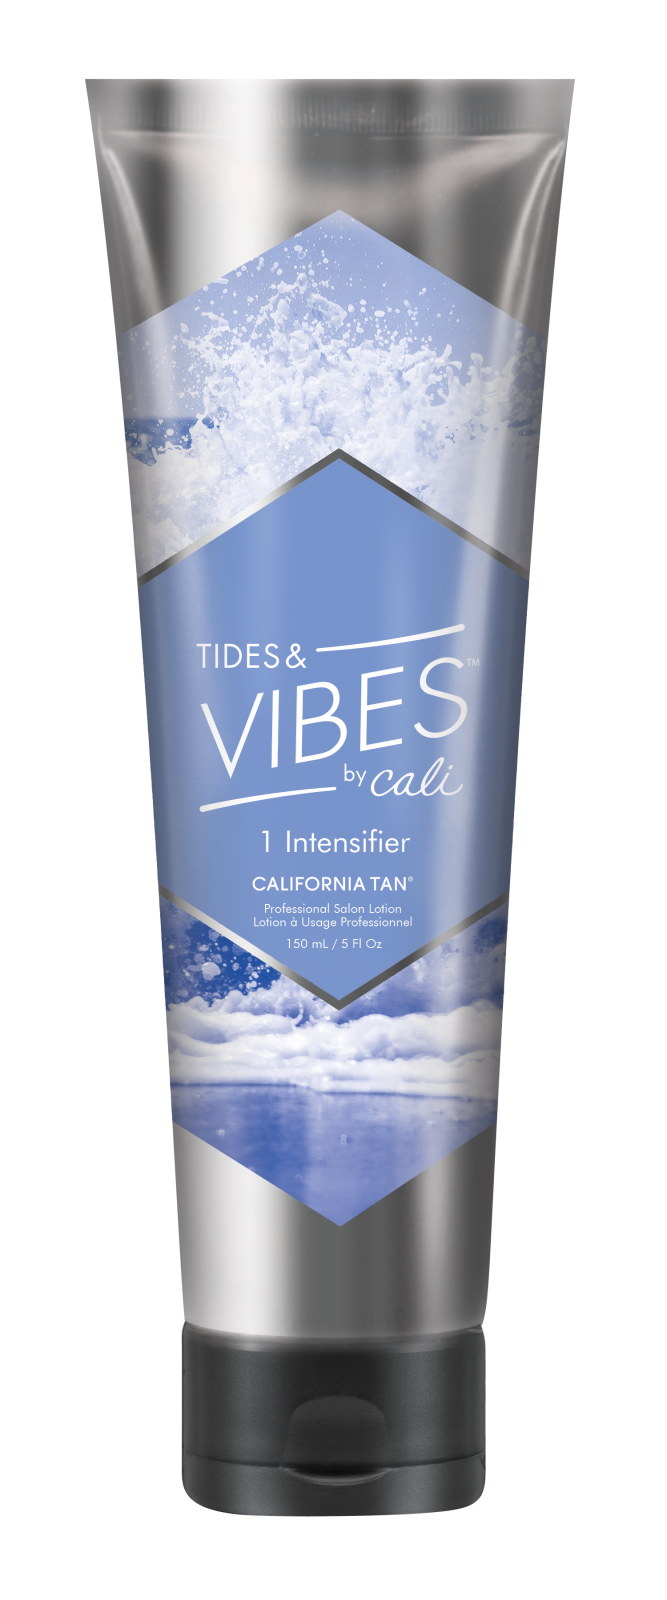 Tides & Vibesâ�¢ by Cali Intensifier Step 1